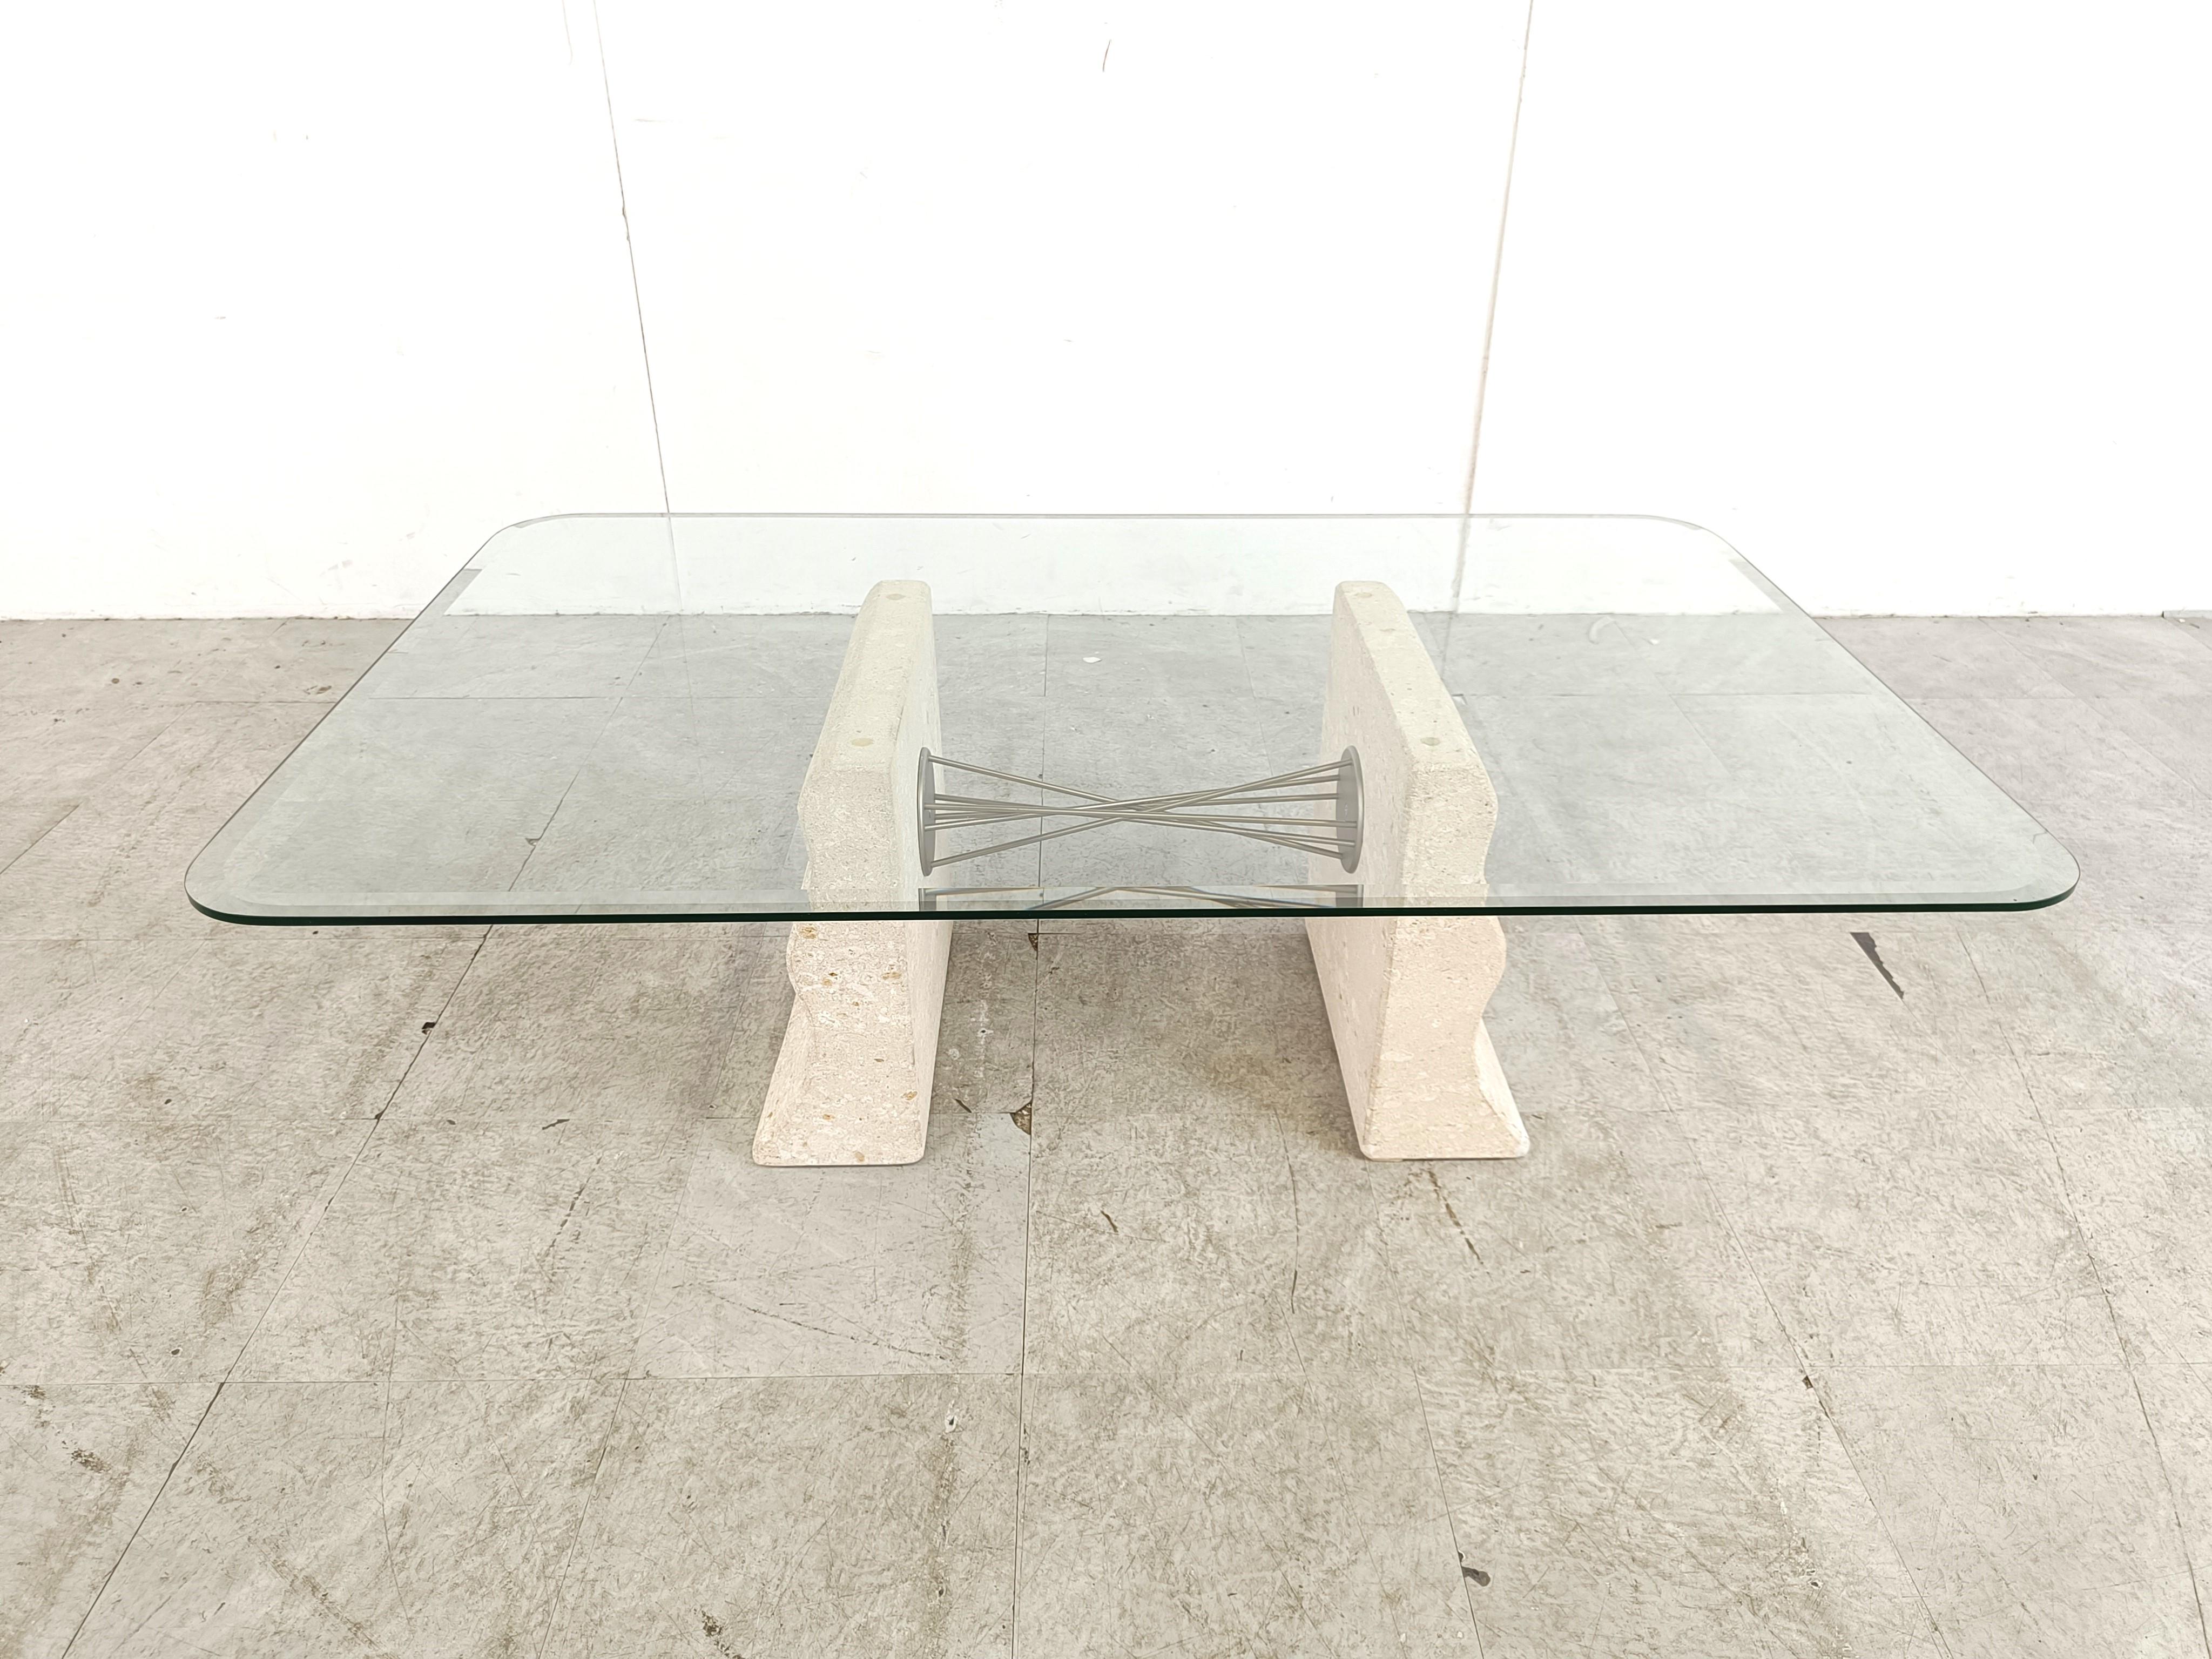 Elegant coffee table with two curved lime stone bases connected with a twisted metal wire piece and a clear glass beveled table top.

Beautiful timeless piece.

Very good condition

1990s - Italy

Dimensions
Height: 40m/15.74